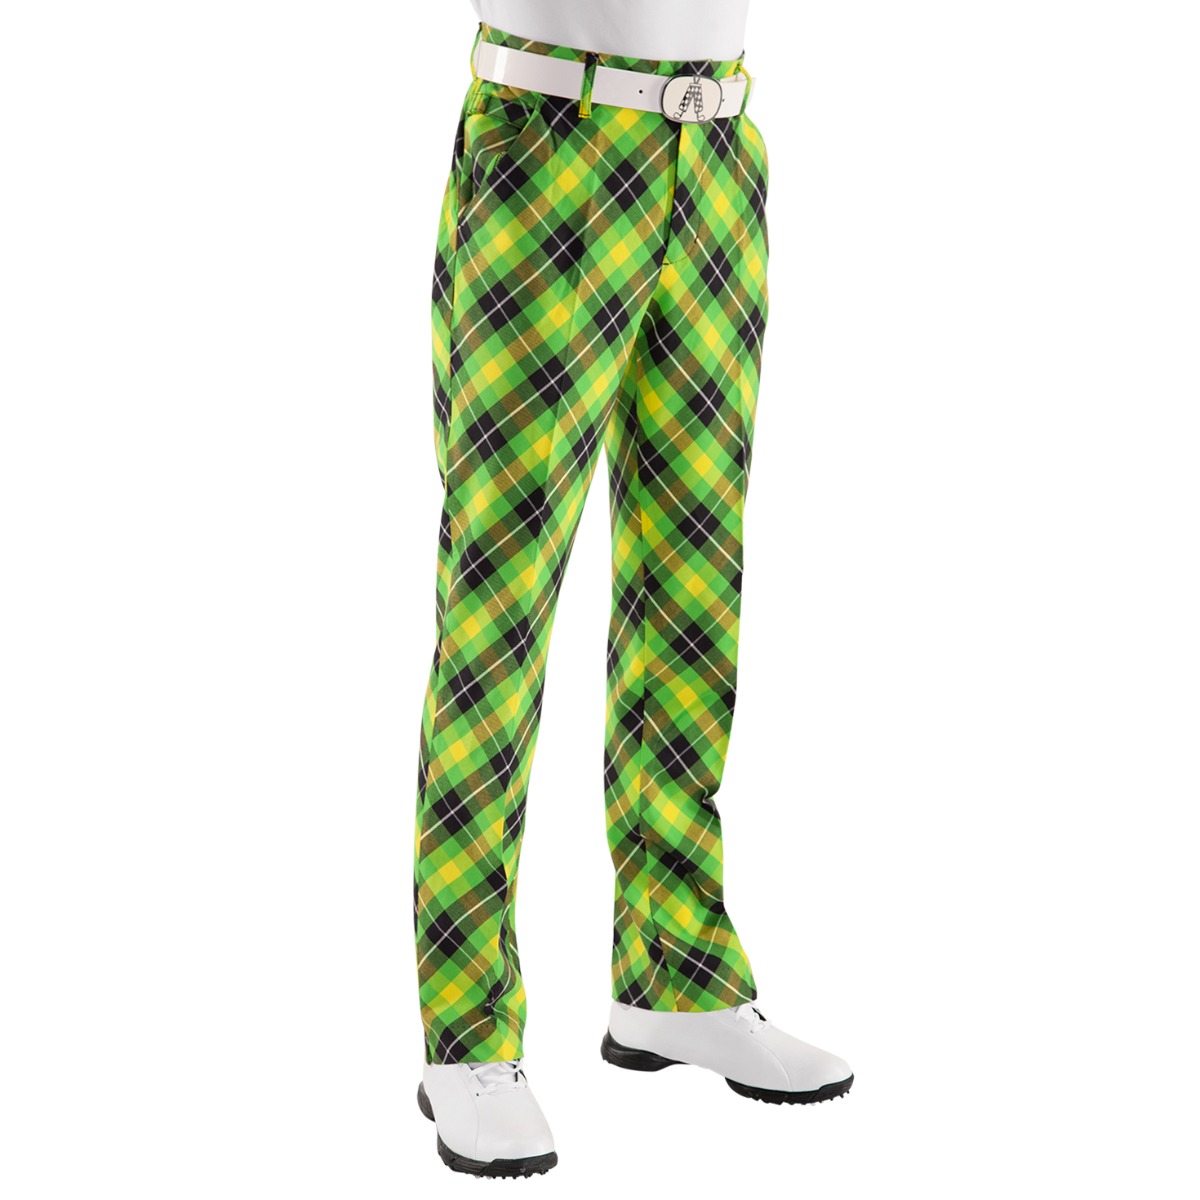 adidas Golf Trousers | Slim Fit Pant Styles